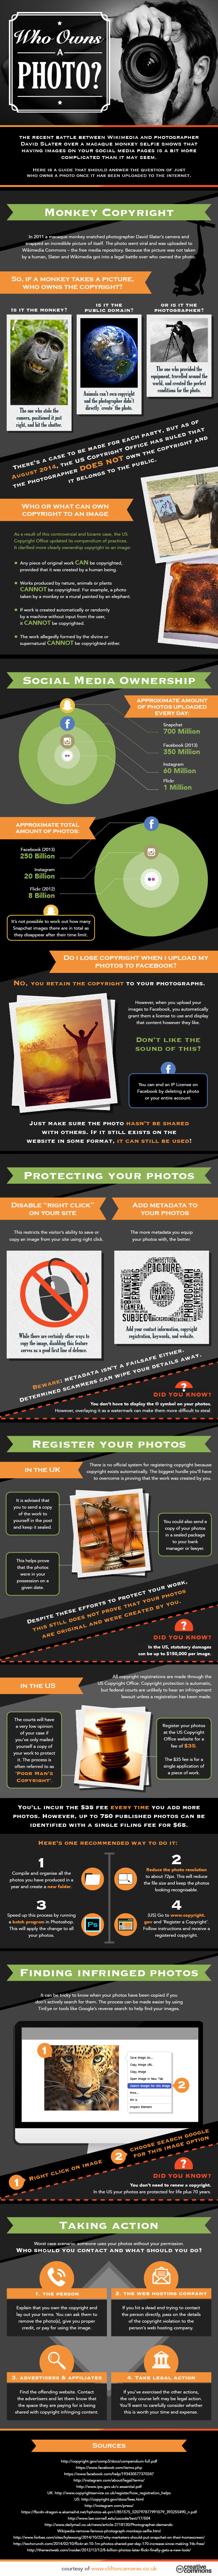 Who has the Photo Copyright and Ownership [Infographic]